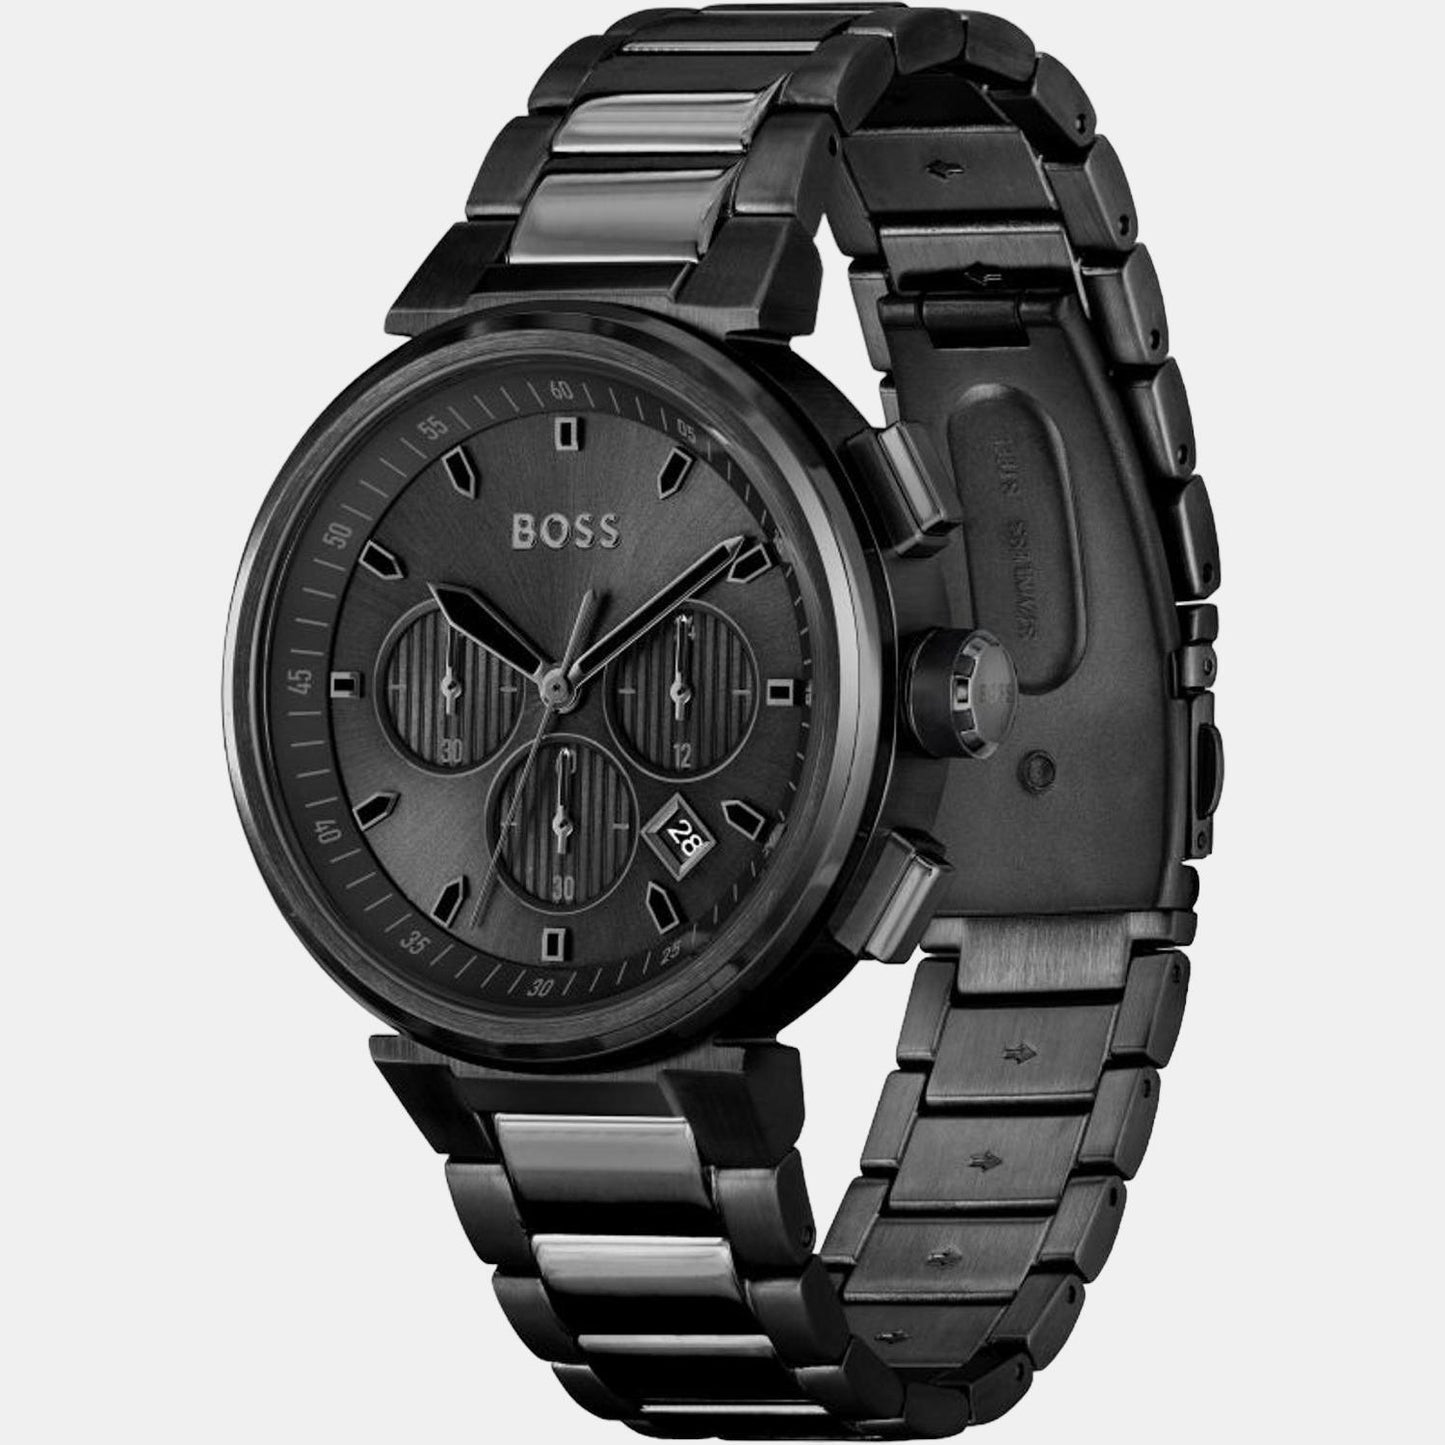 Men's Black Chronograph Stainless Steel Watch 1514001